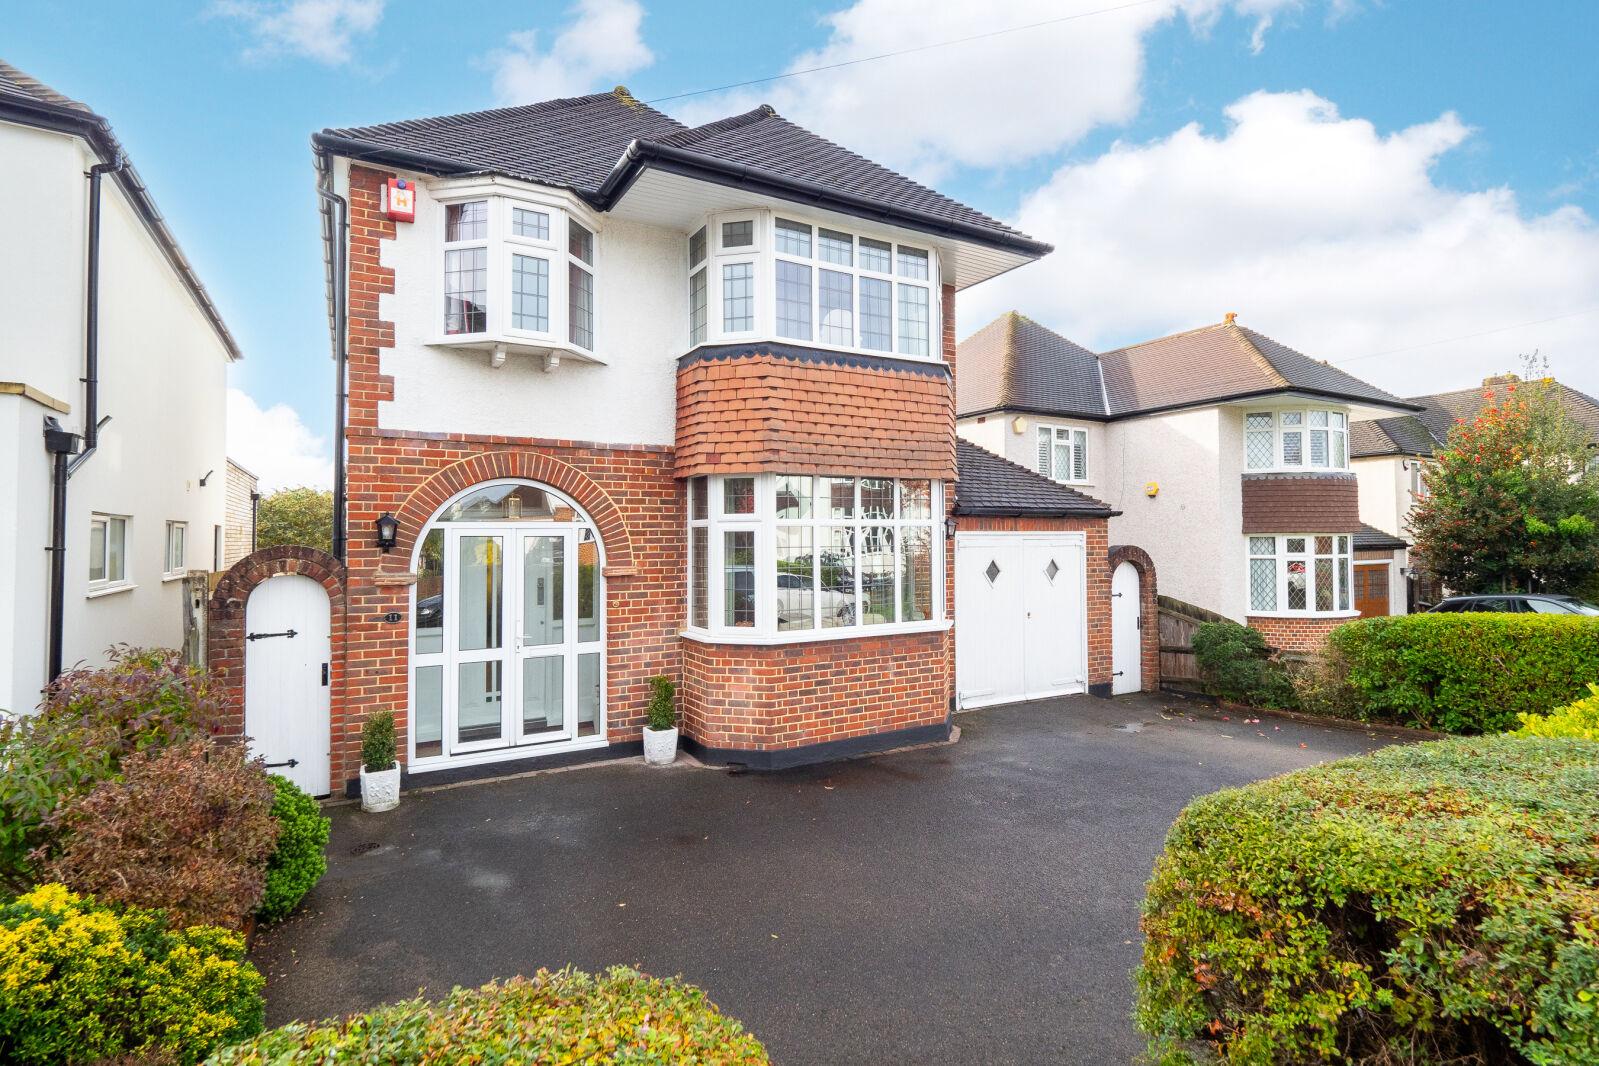 3 bedroom detached house for sale Merrow Road, Cheam, SM2, main image